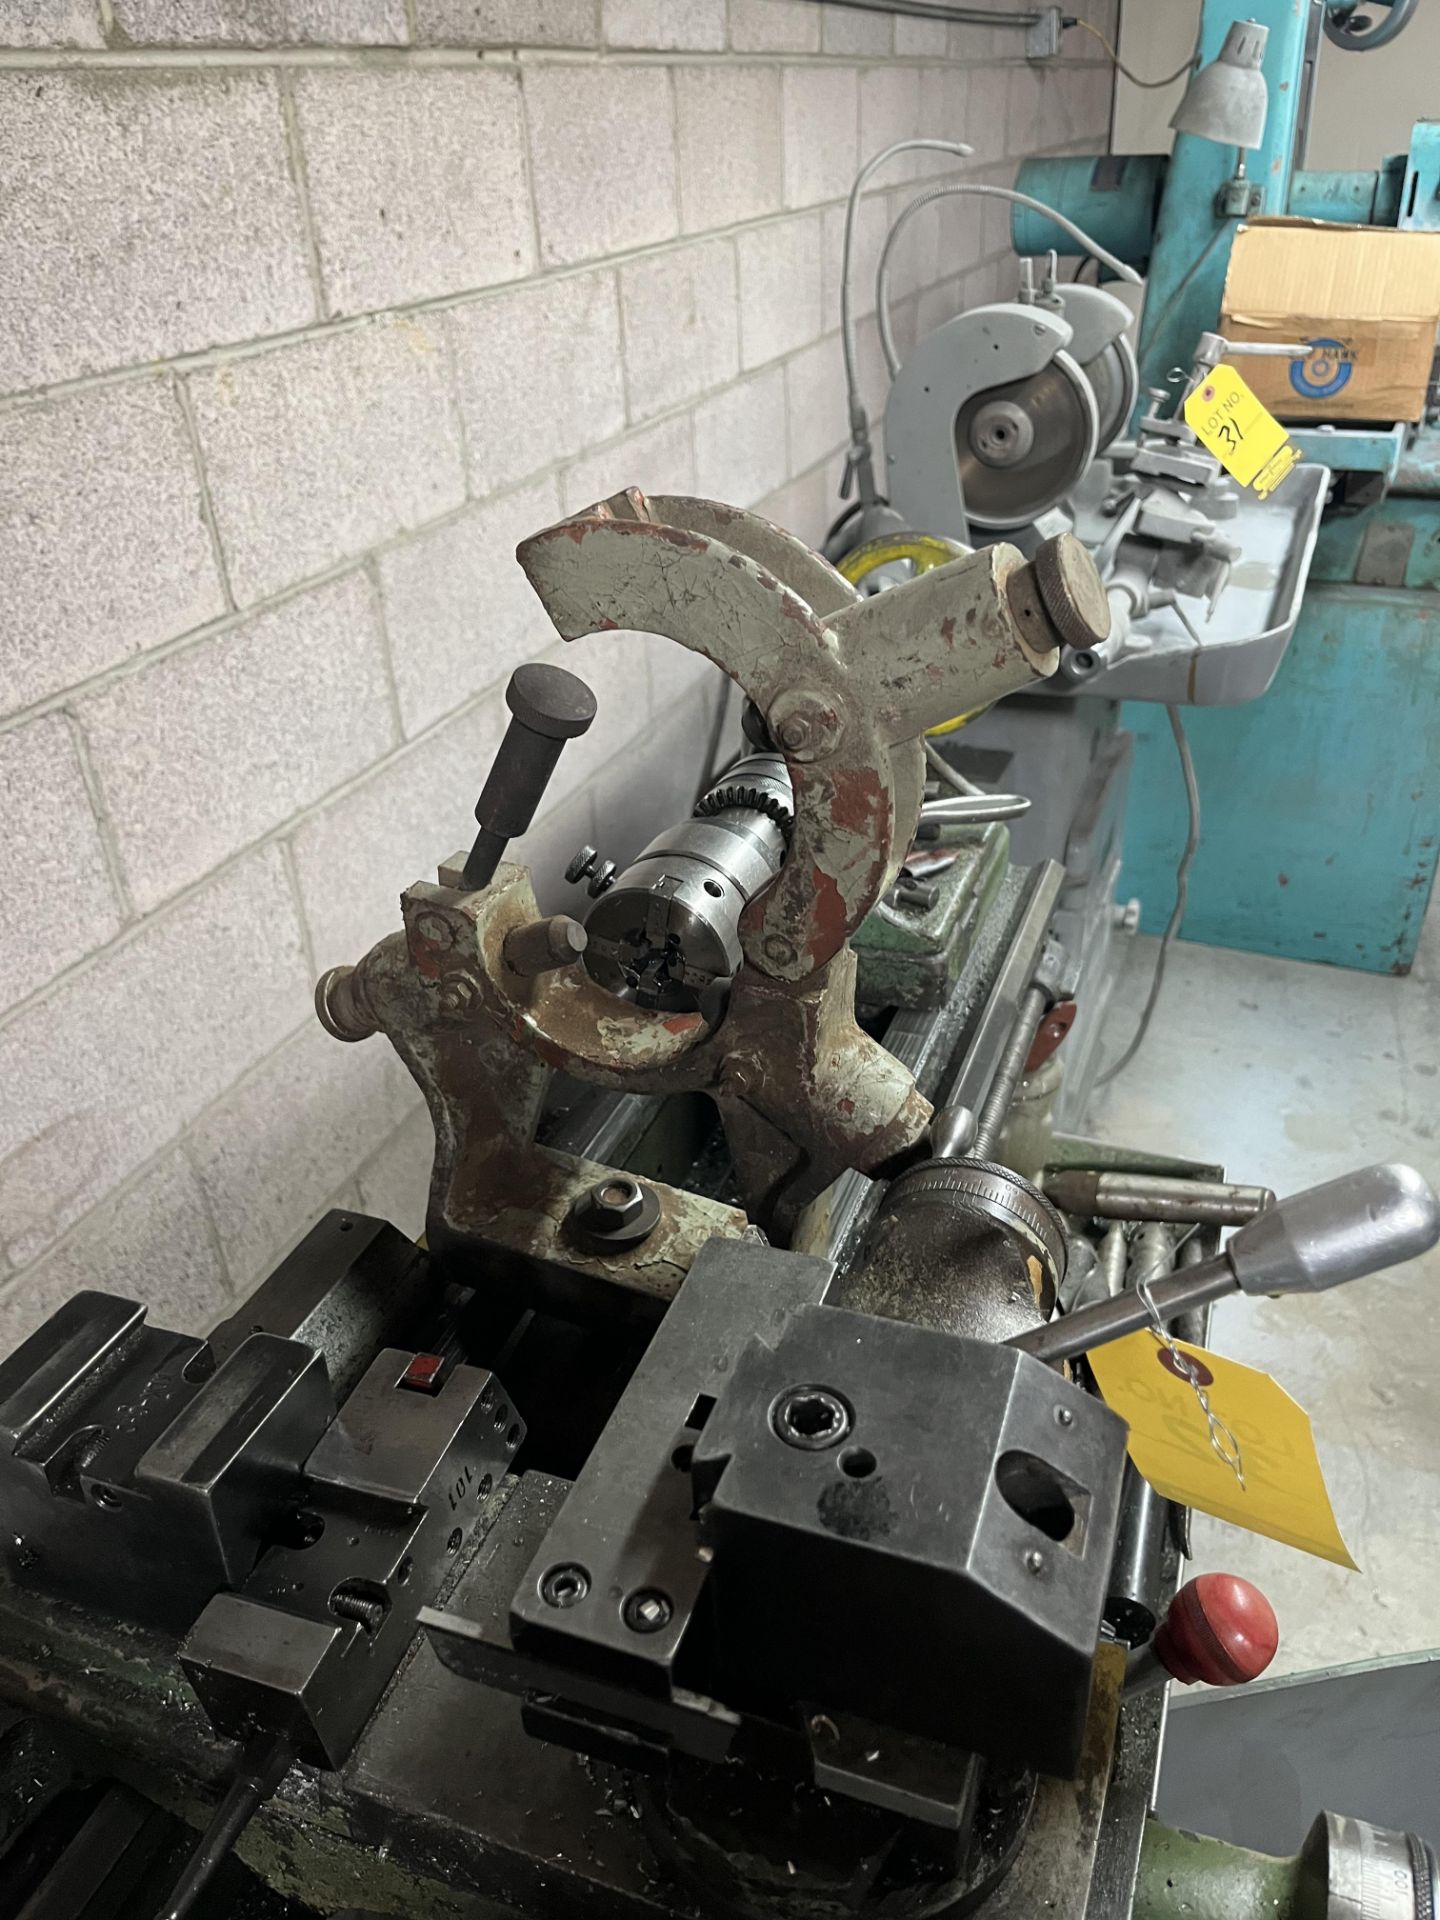 ROCKWELL 13 X 24 ENGINE LATHE W/3-JAW CHUCK, KDK TOOL POST & HOLDERS, DRILL CHUCK, ETC. - Image 8 of 8